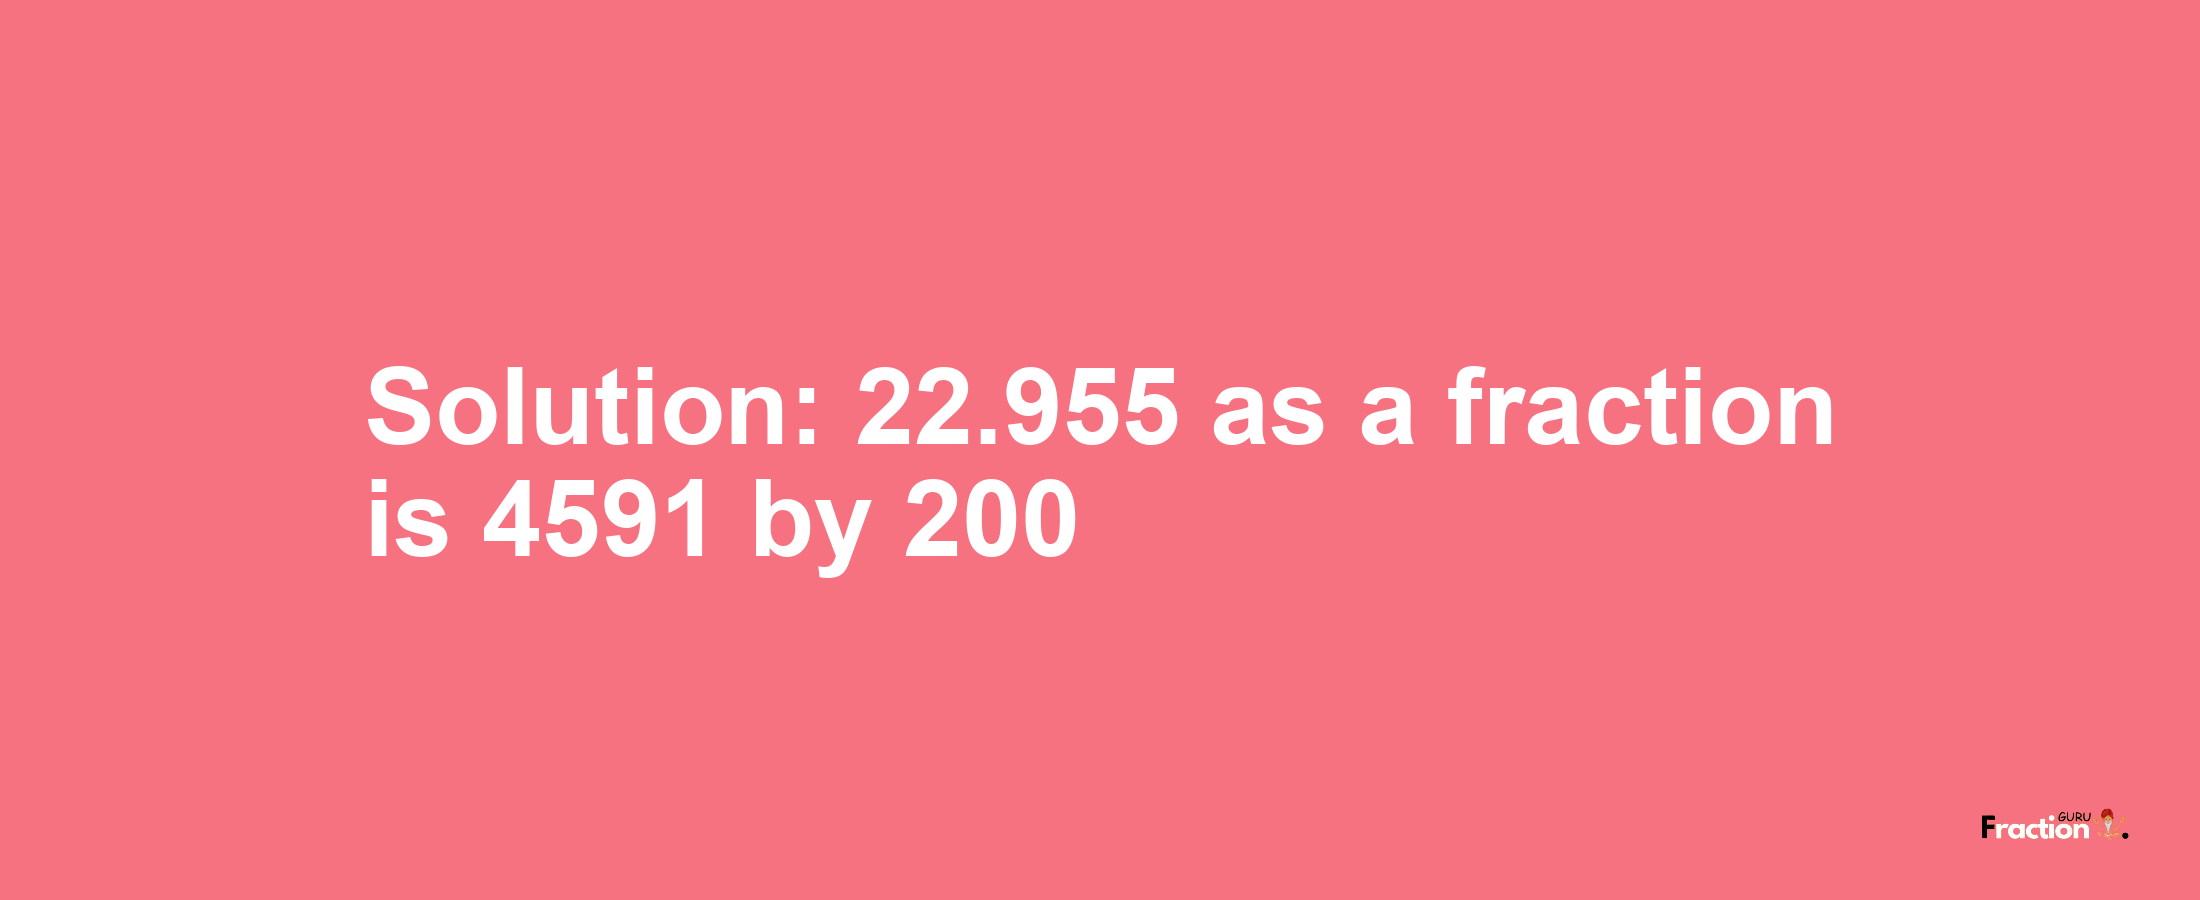 Solution:22.955 as a fraction is 4591/200